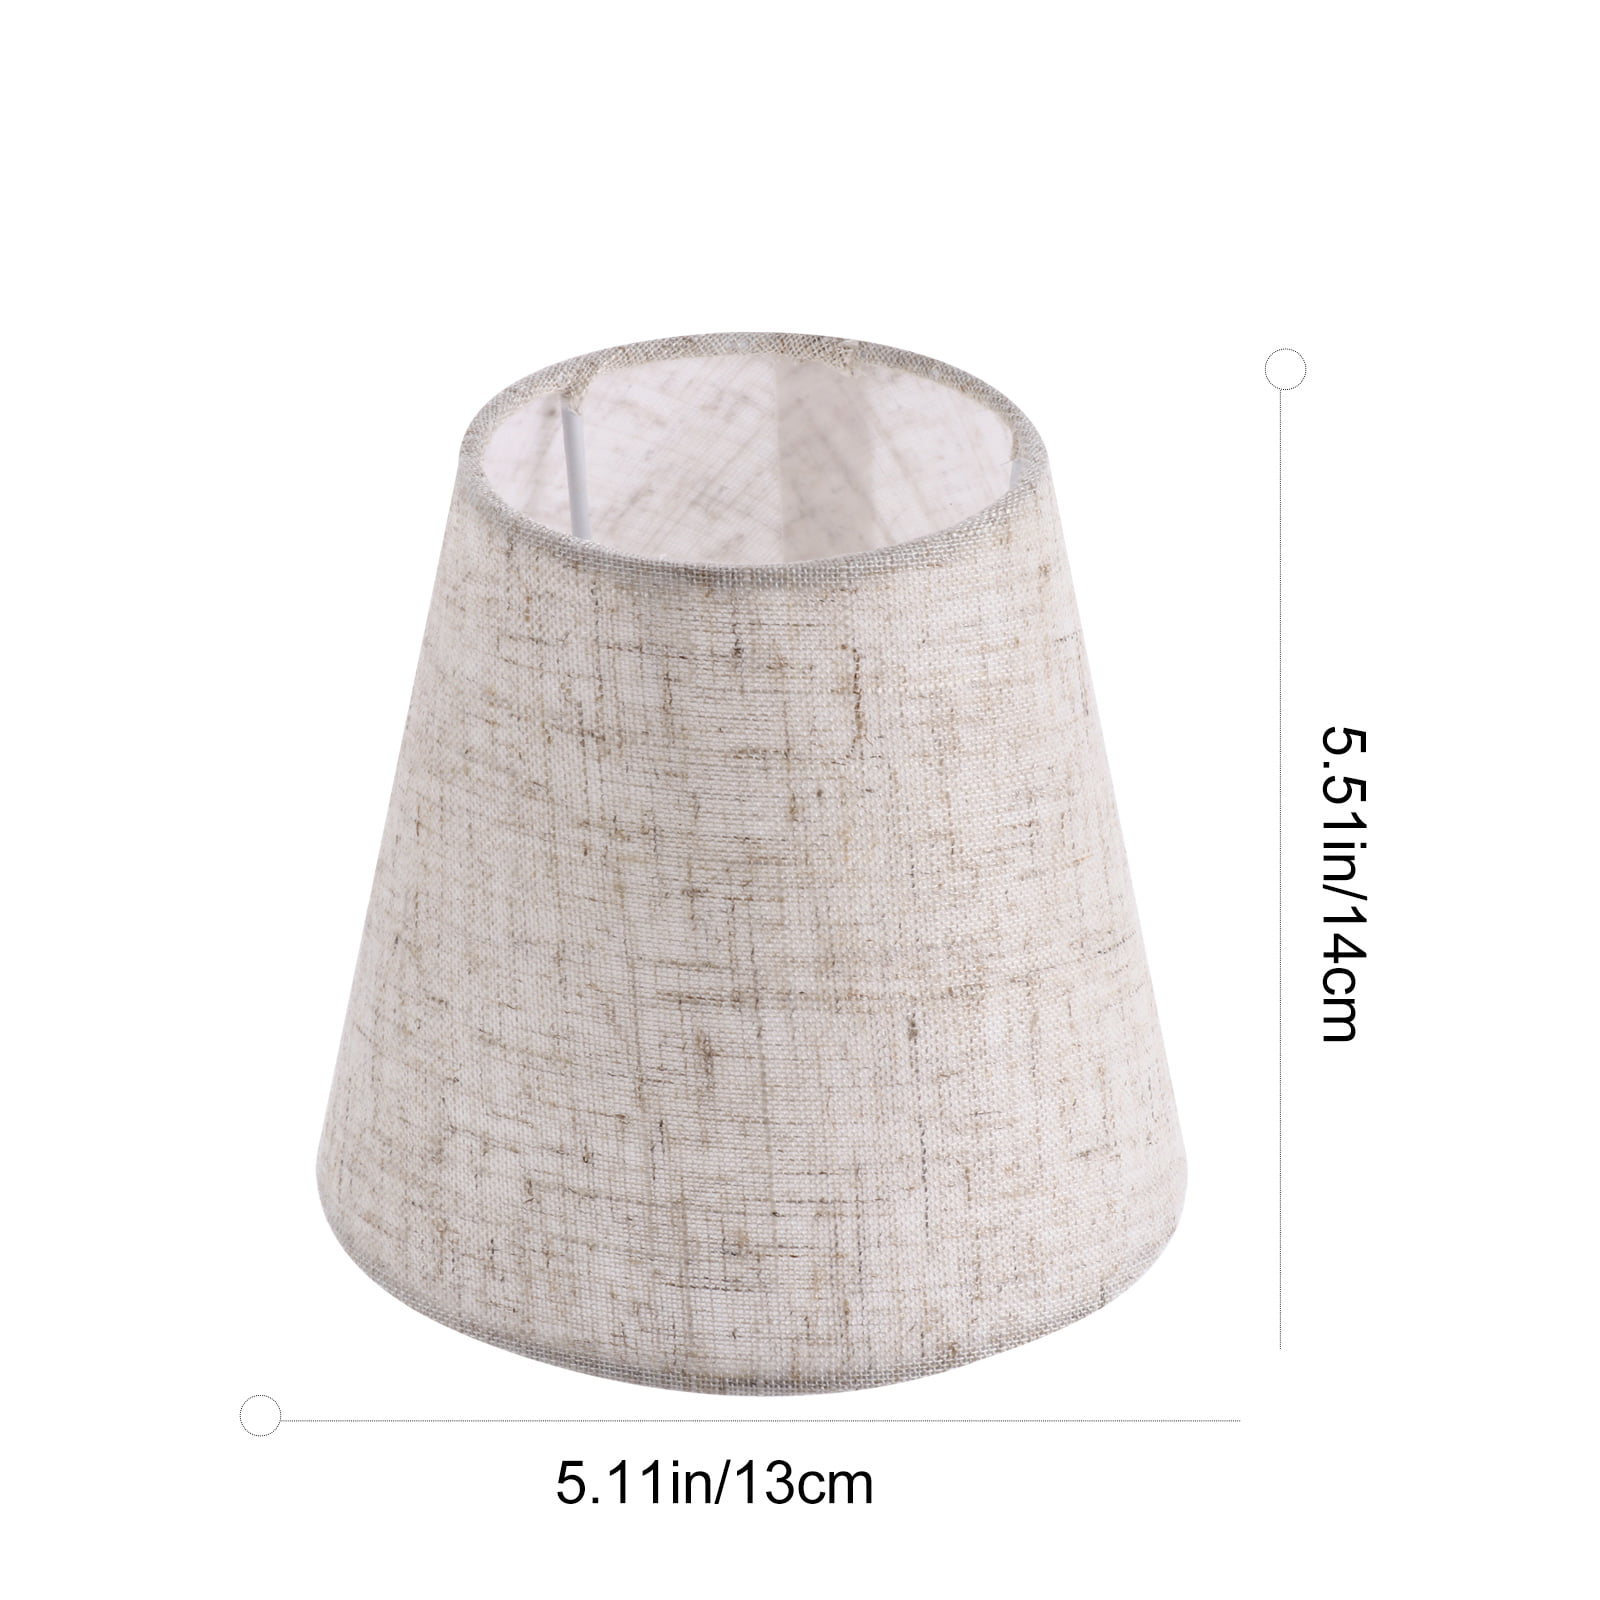 1pc Wall Lamp Fabric Lampshade Modern Cloth Lamp Cover for Home Office 14cm 